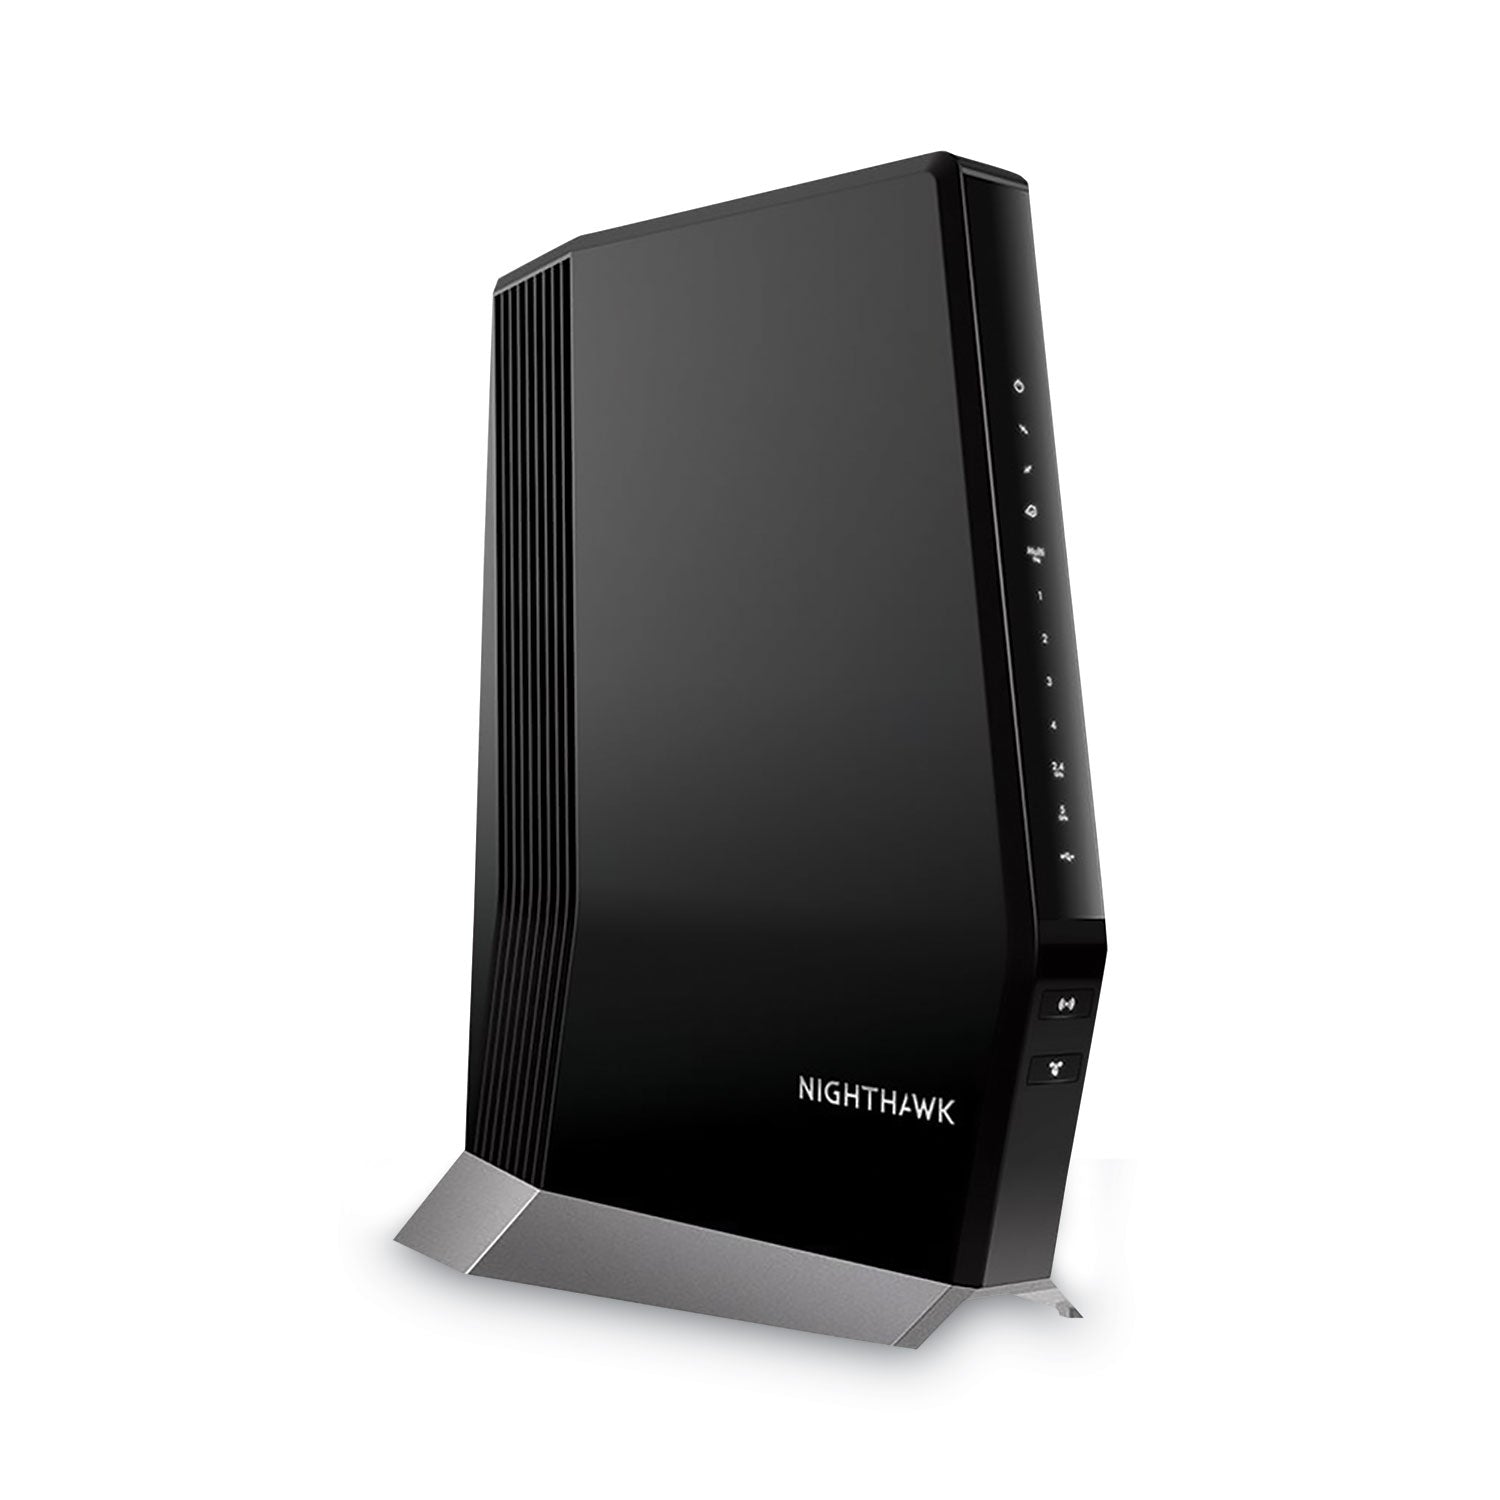 nighthawk-ax6000-dual-band-wi-fi-cable-modem-router-4-ports-dual-band-24-ghz-5-ghz_ngrcax80100nas - 2